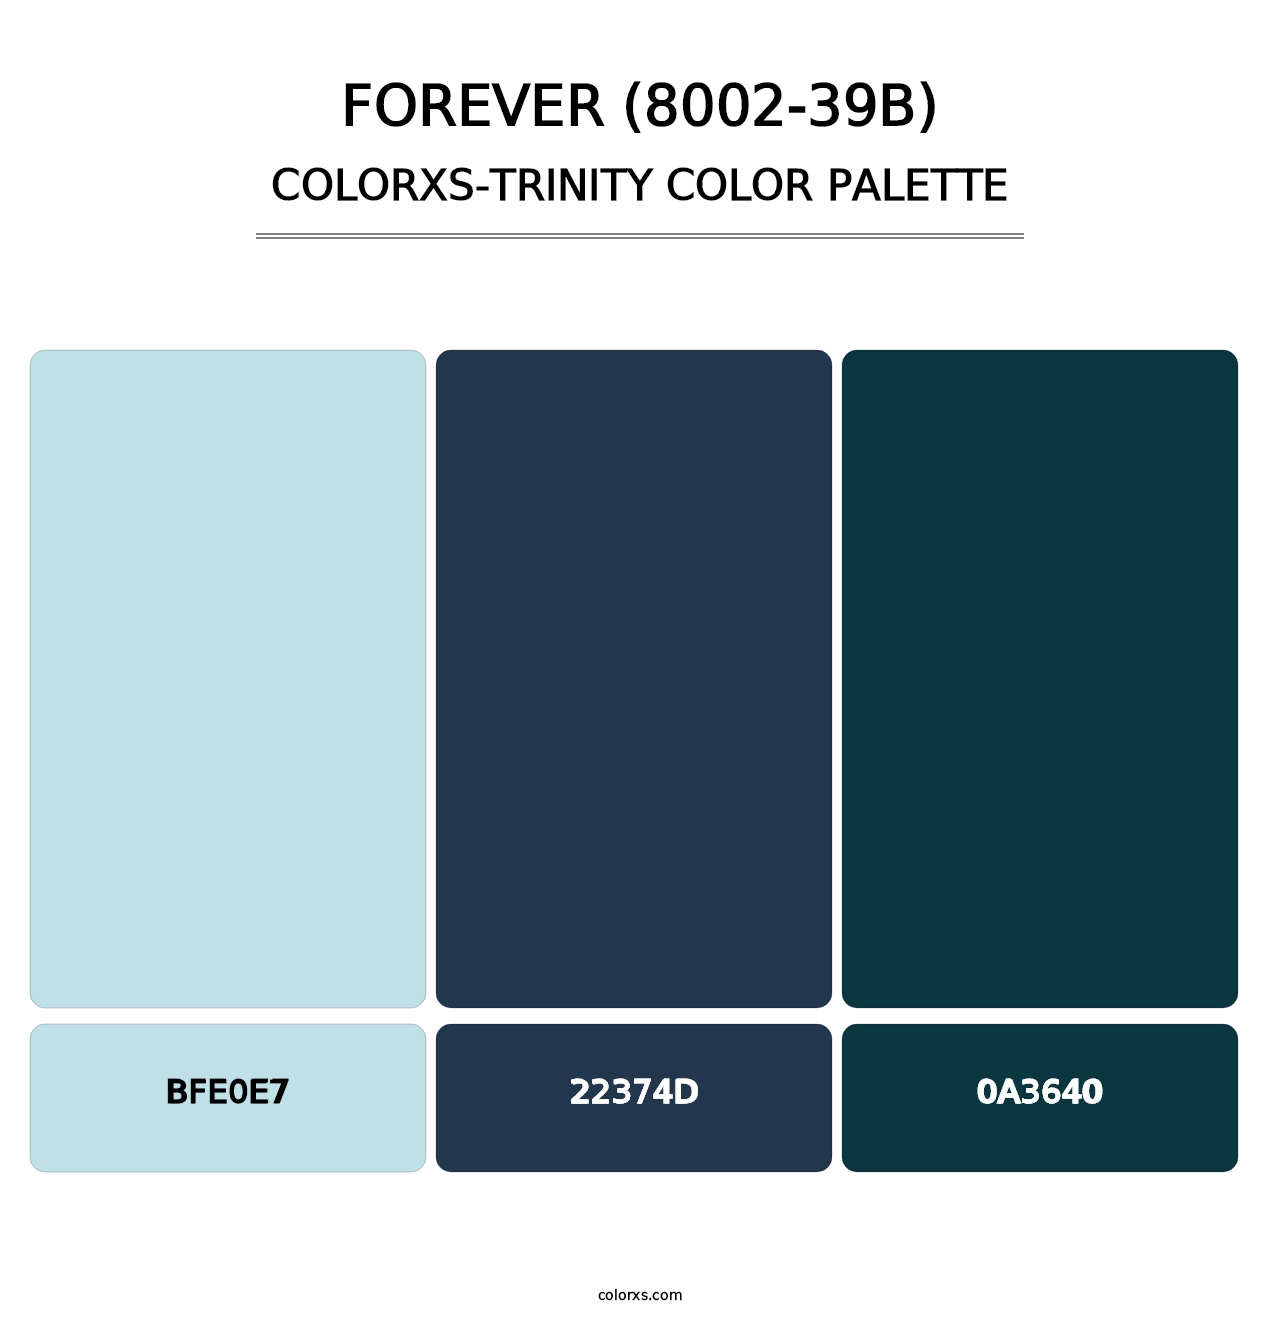 Forever (8002-39B) - Colorxs Trinity Palette